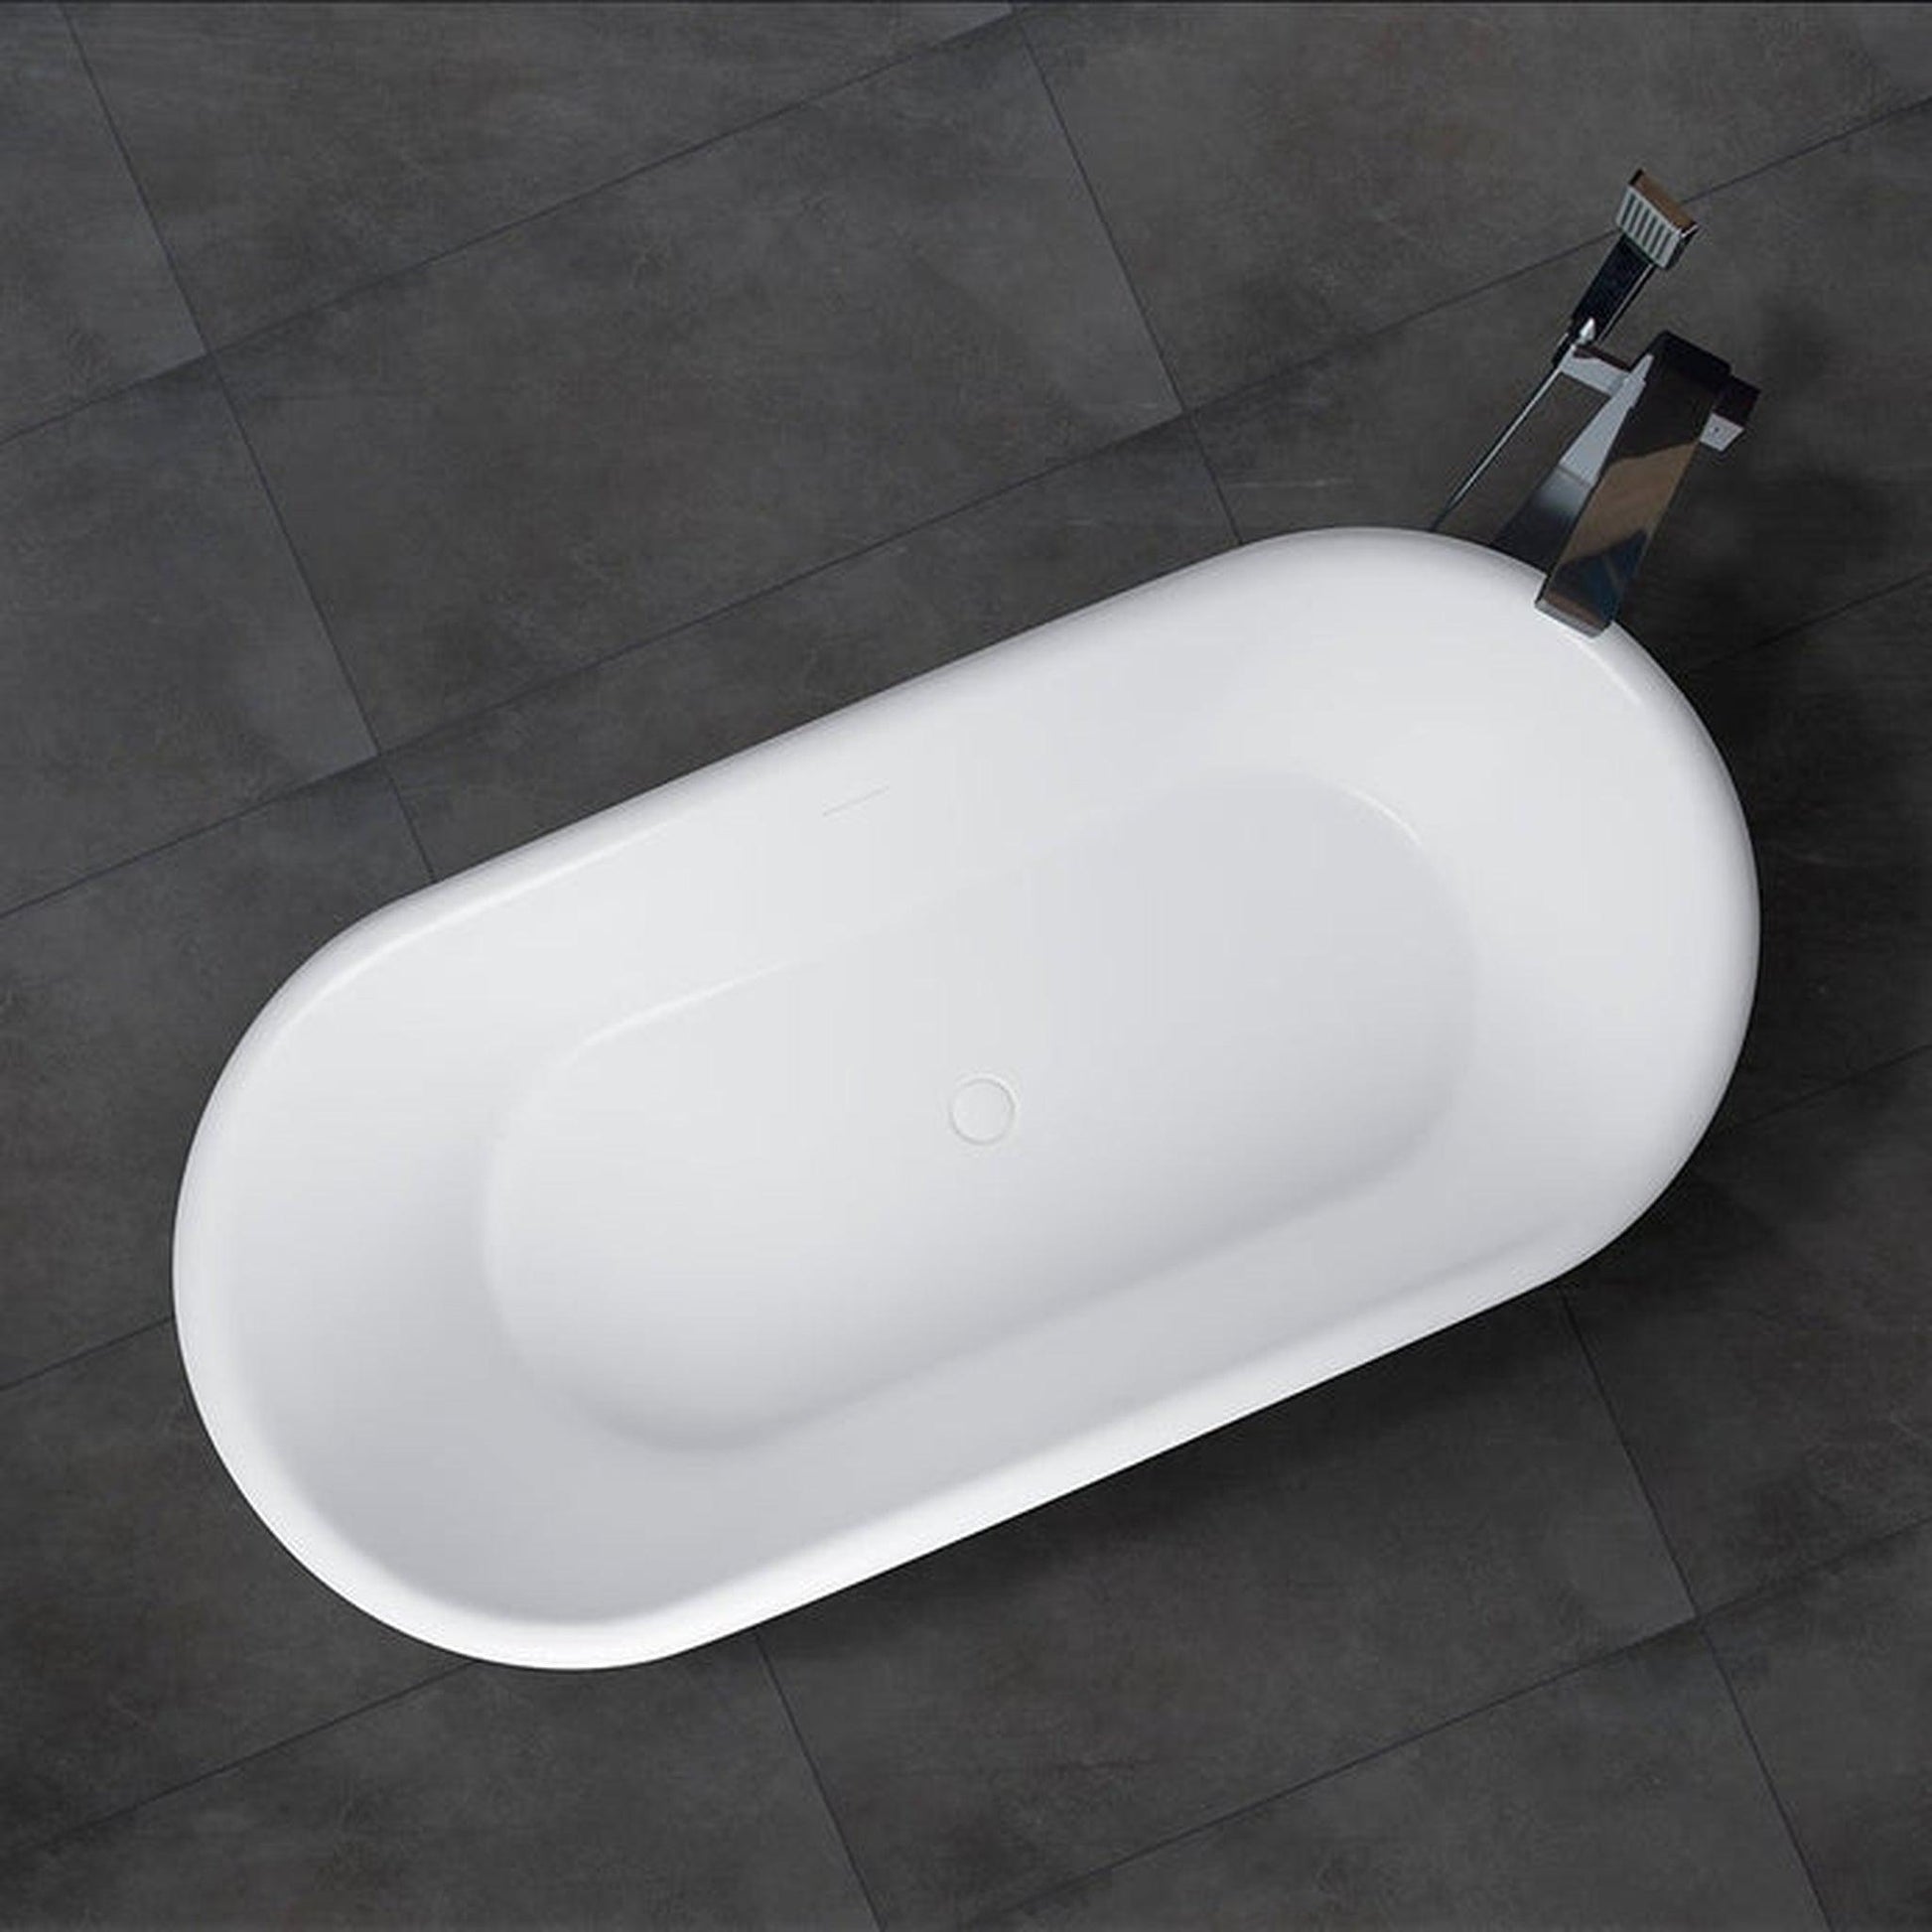 Vanity Art 67" Glossy White Flatbottom Freestanding Solid Surface Resin Stone Bathtub With Slotted Overflow and Pop-up Drain